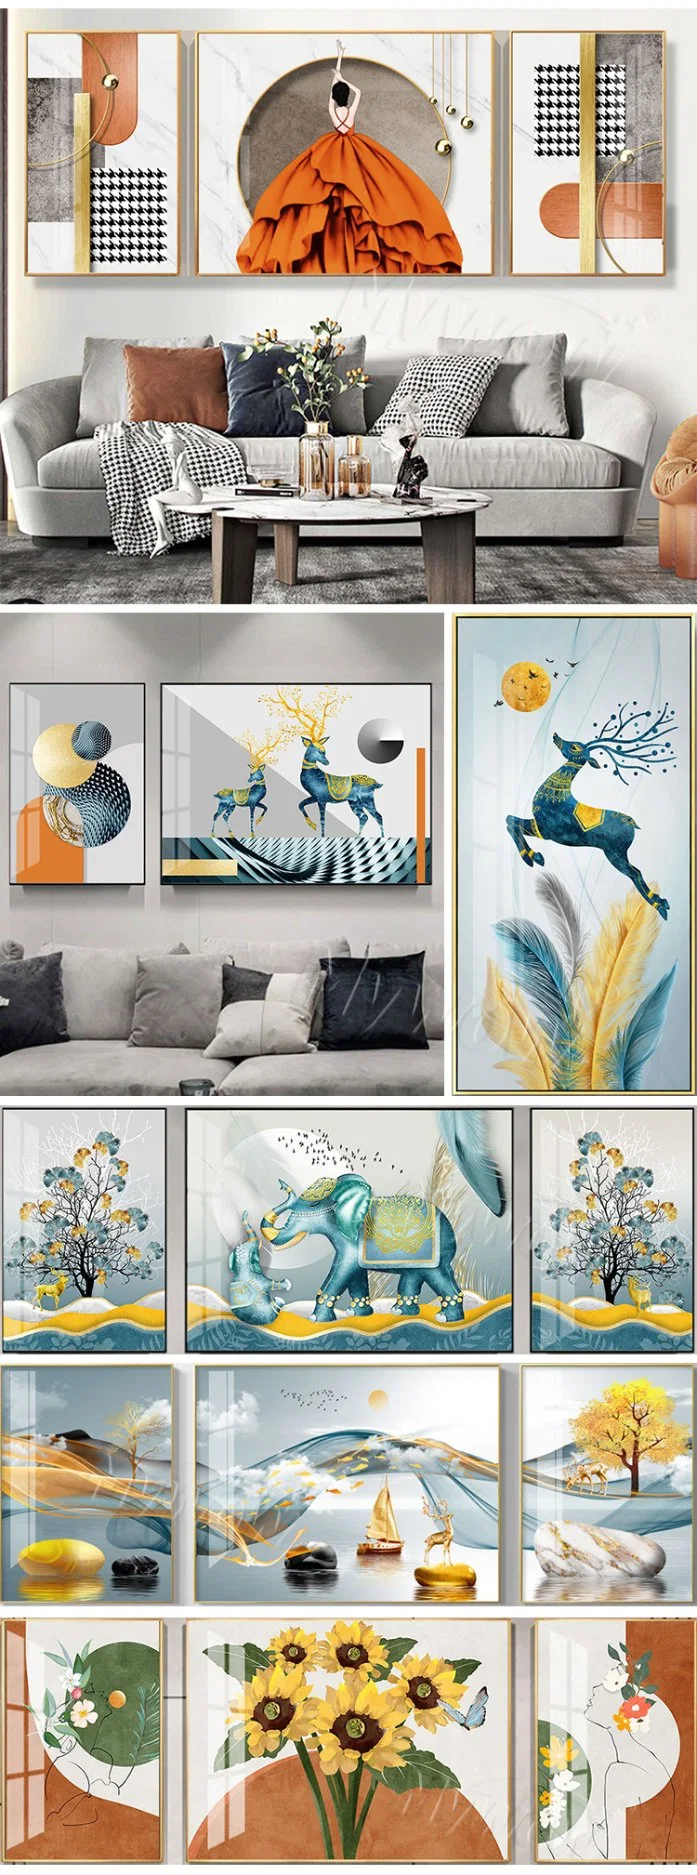 Popular Design Wall Art Work Painting for Home Living Room Decoration